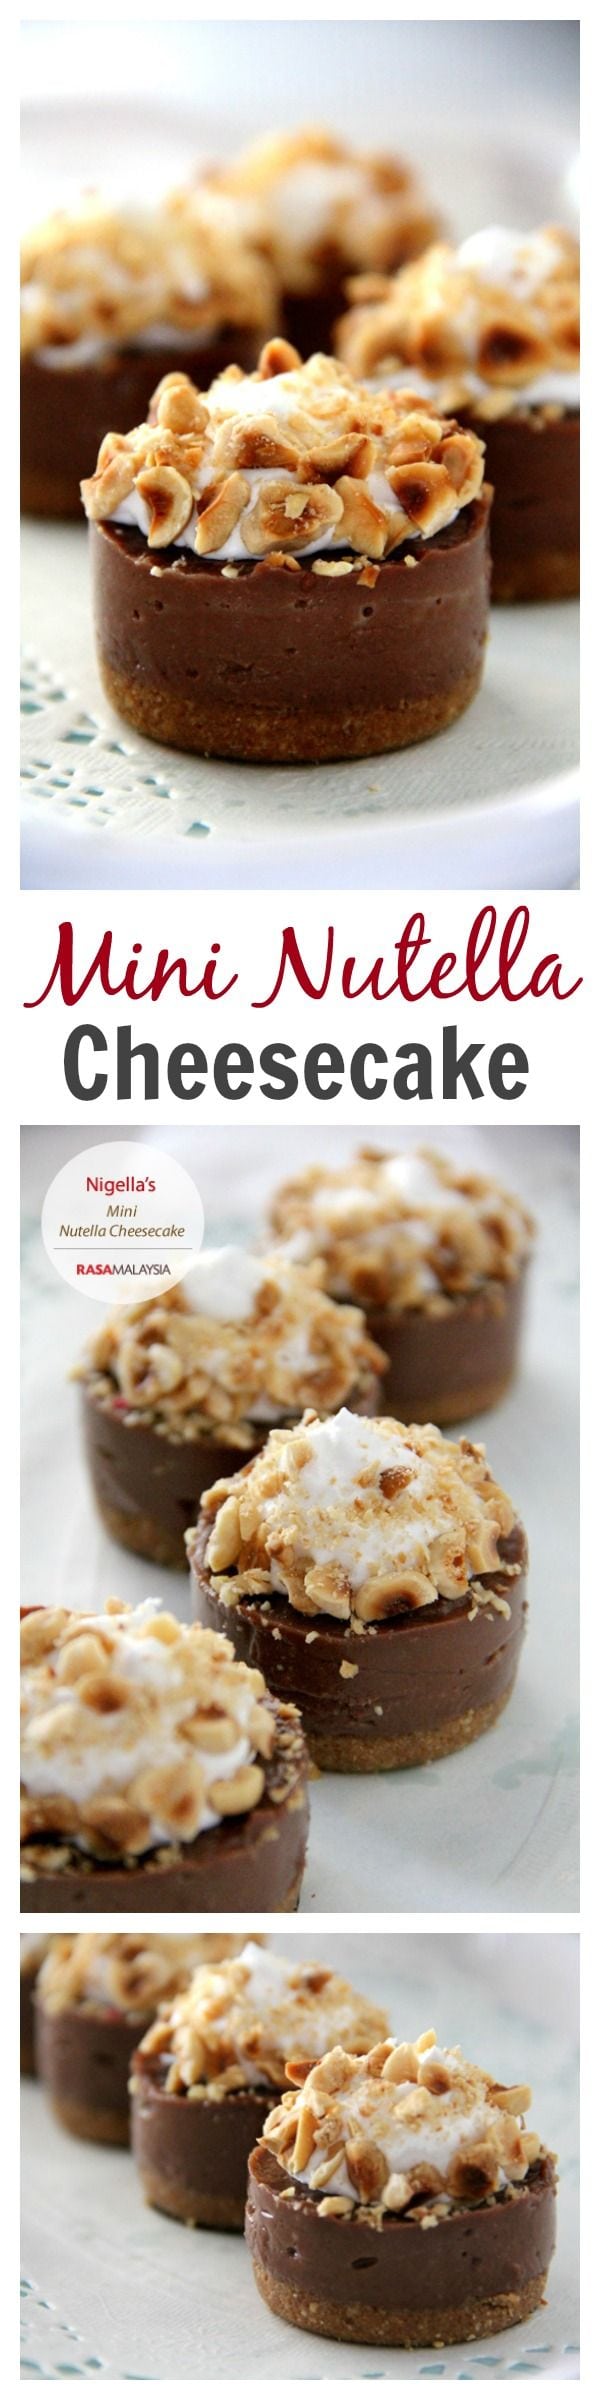 No bake Nutella cheesecake, in mini cupcake size. Loaded with creamy cream cheese and Nutella, topped with whipped cream and toasted hazelnuts | rasamalaysia.com